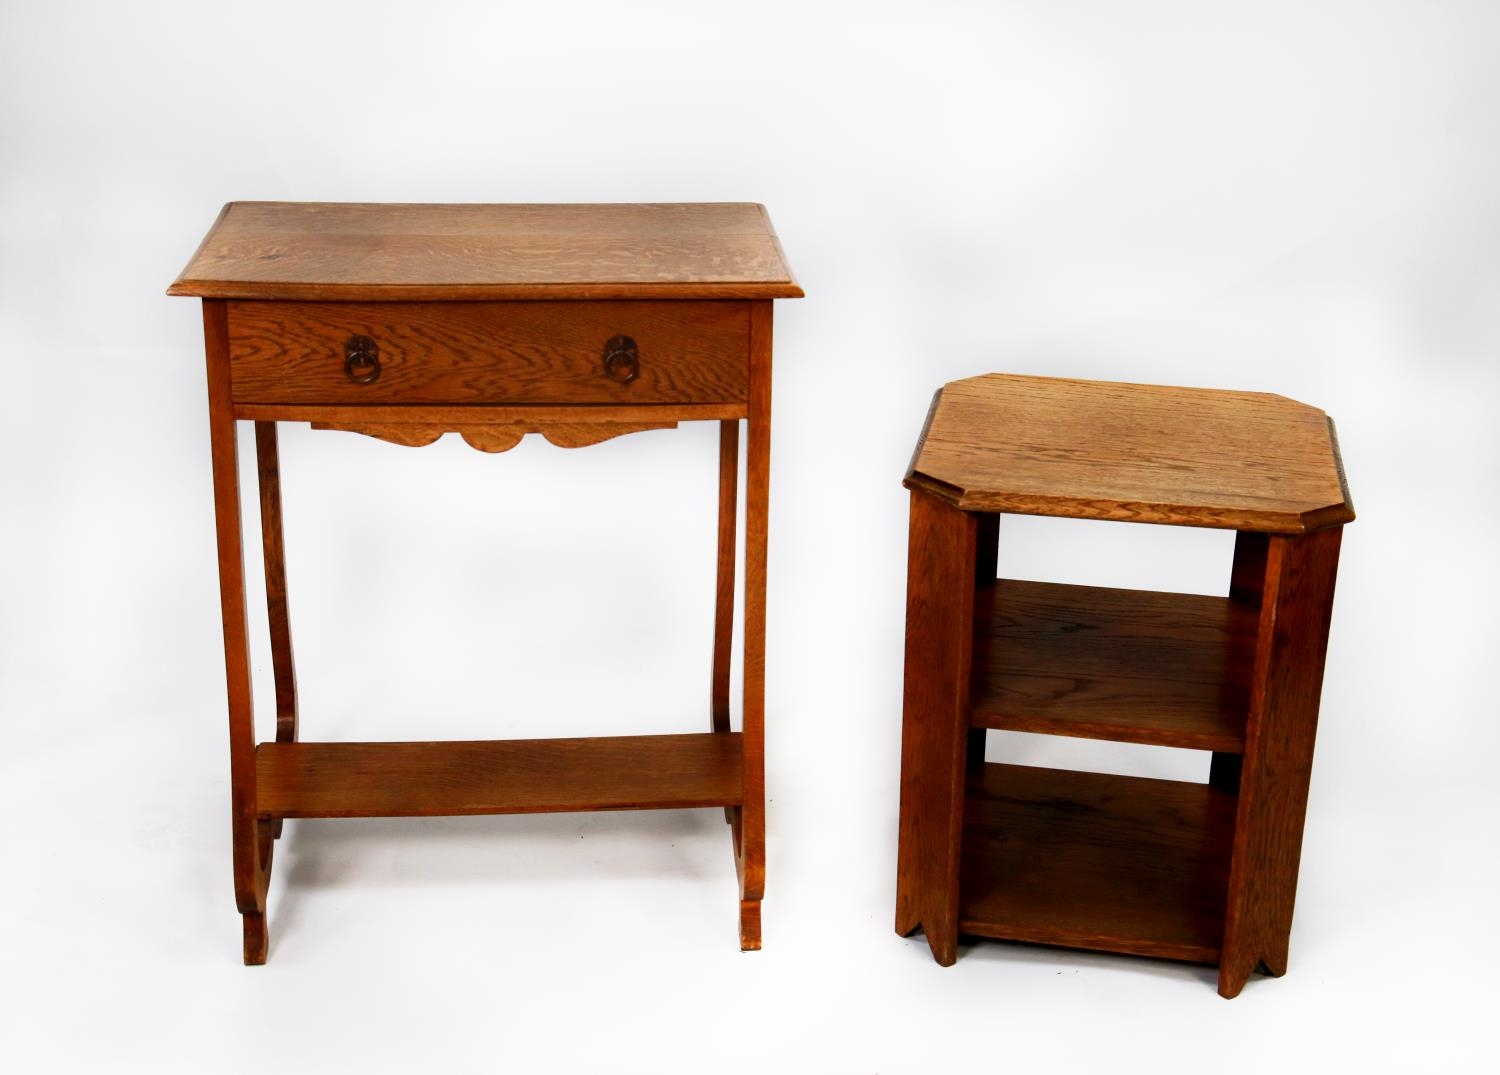 EARLY TWENTIETH CENTURY ARTS AD CRAFTS LIGHT OAK SIDE TABLE, the moulded oblong top above a frieze